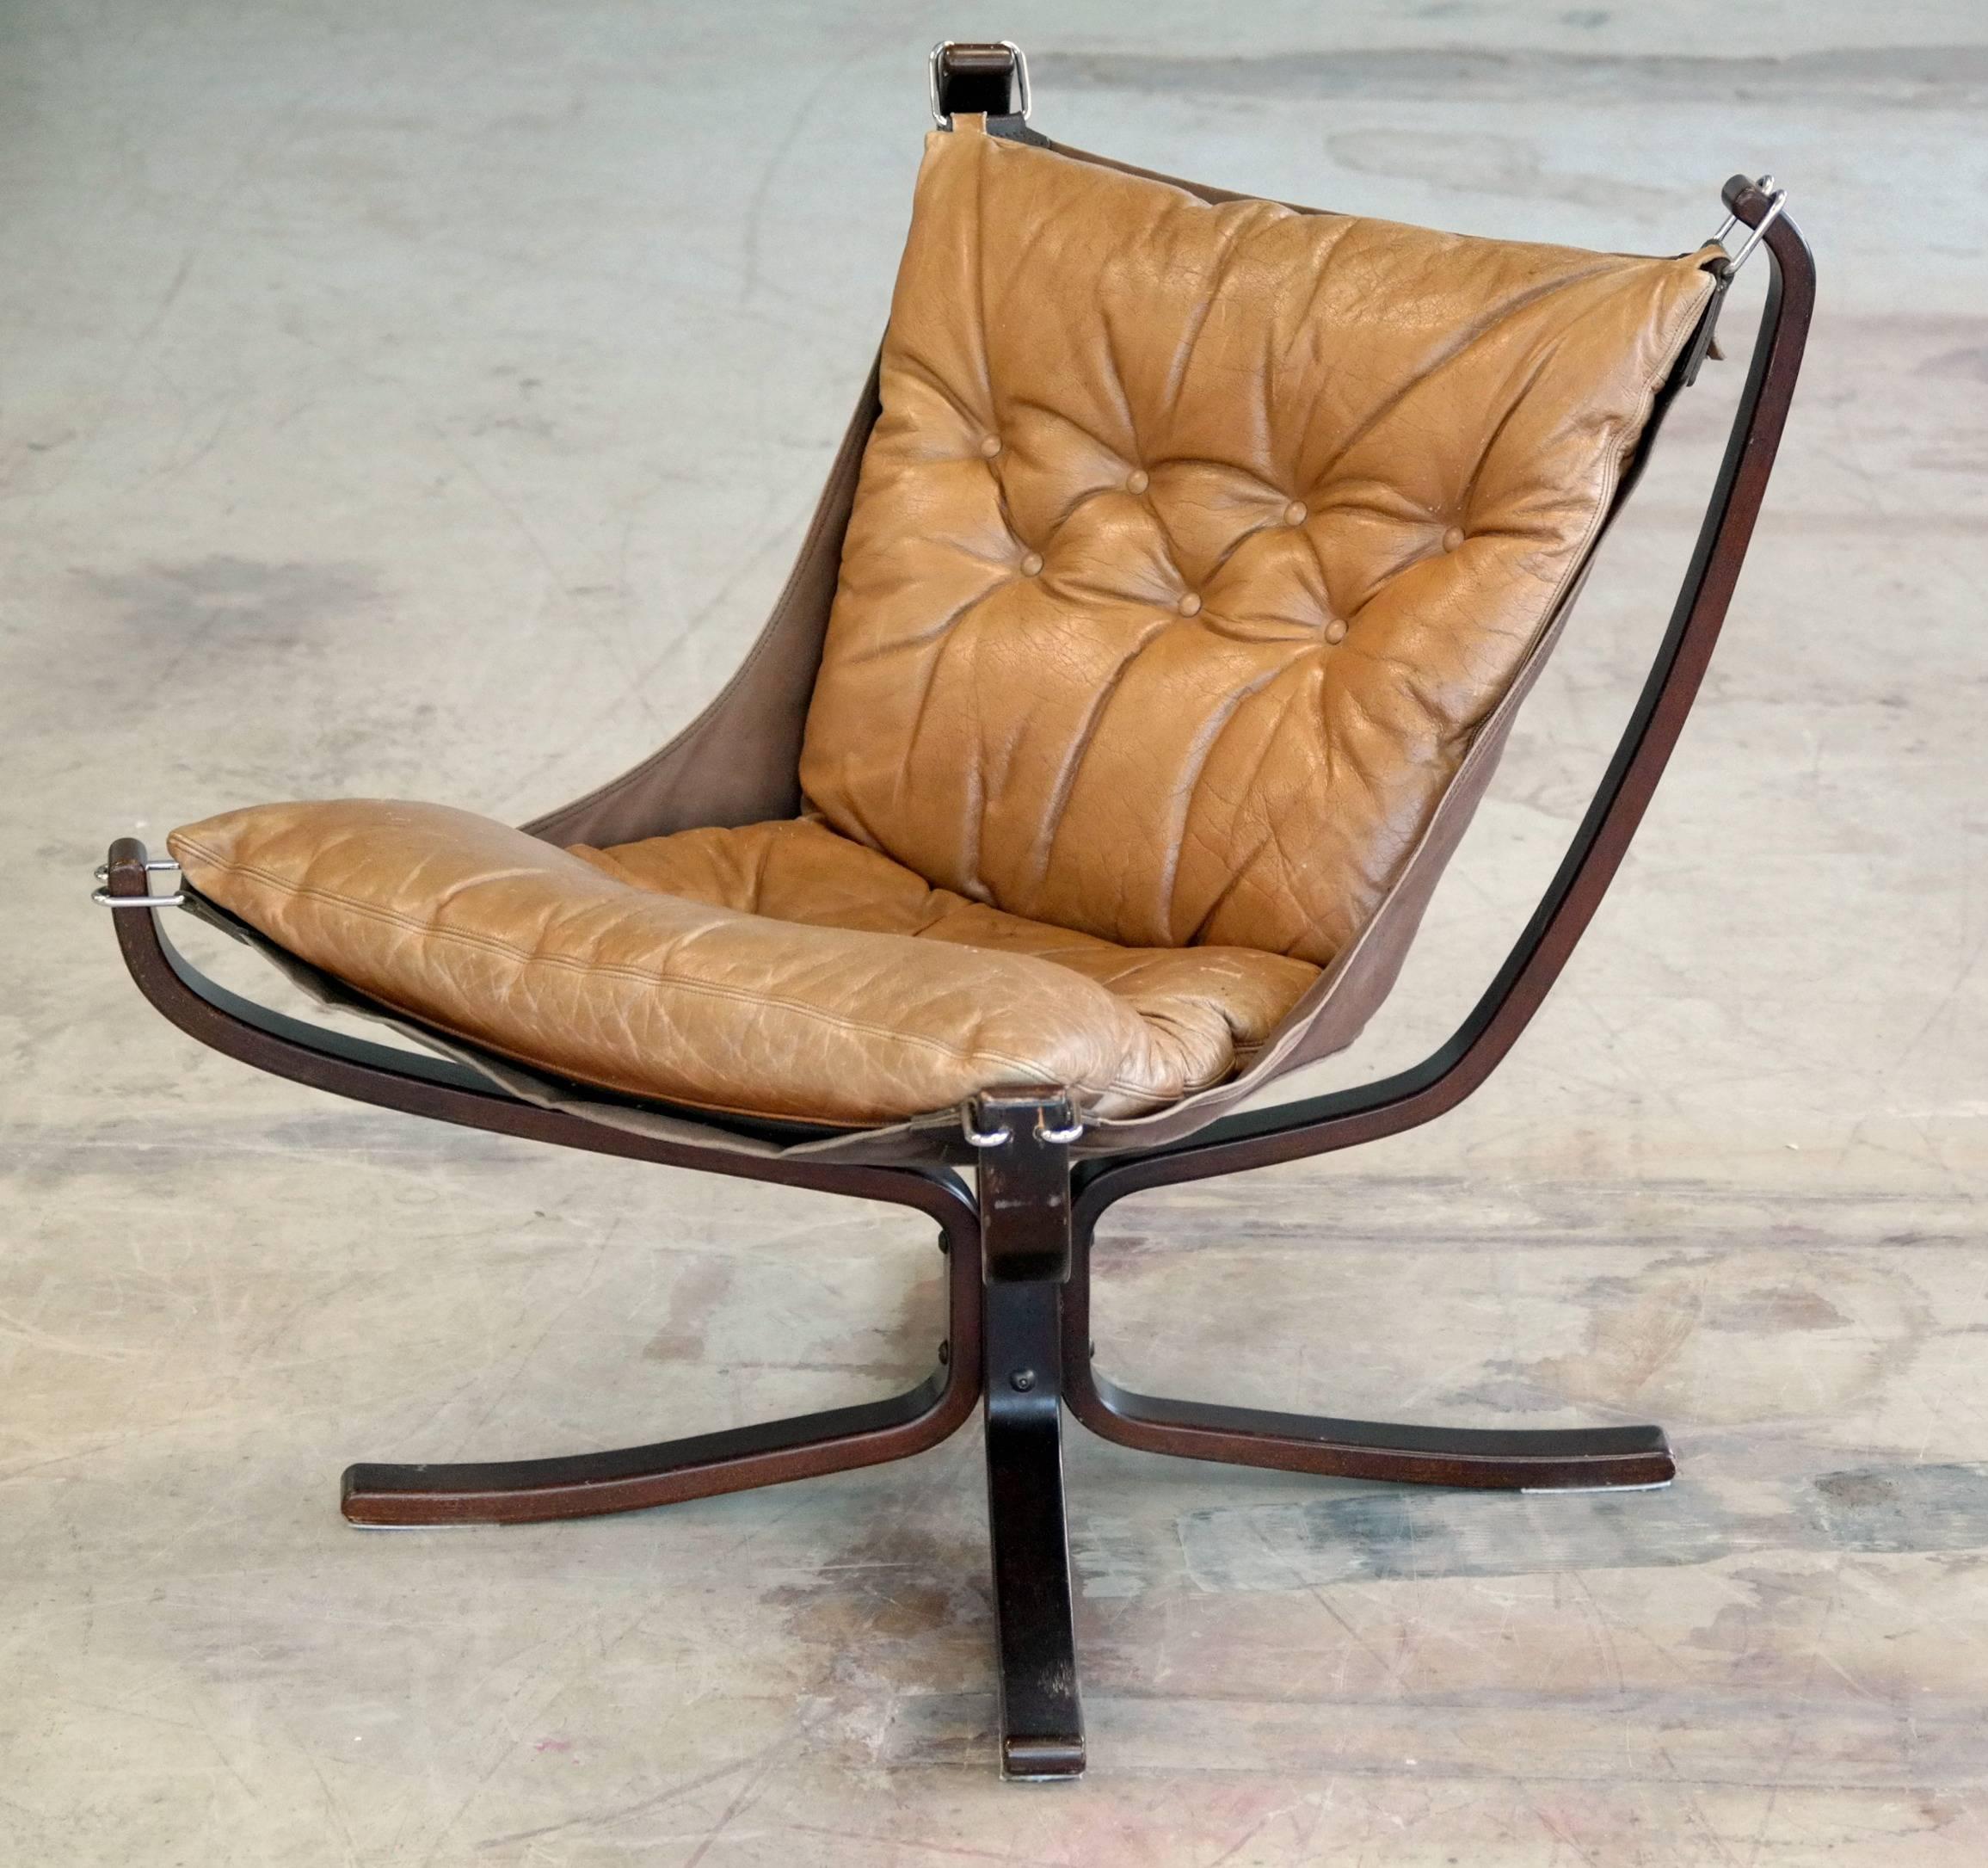 The Classic falcon chair in beautifully patinated cognac colored Leather by Sigurd Ressell for Vatne Mobler, Norway.